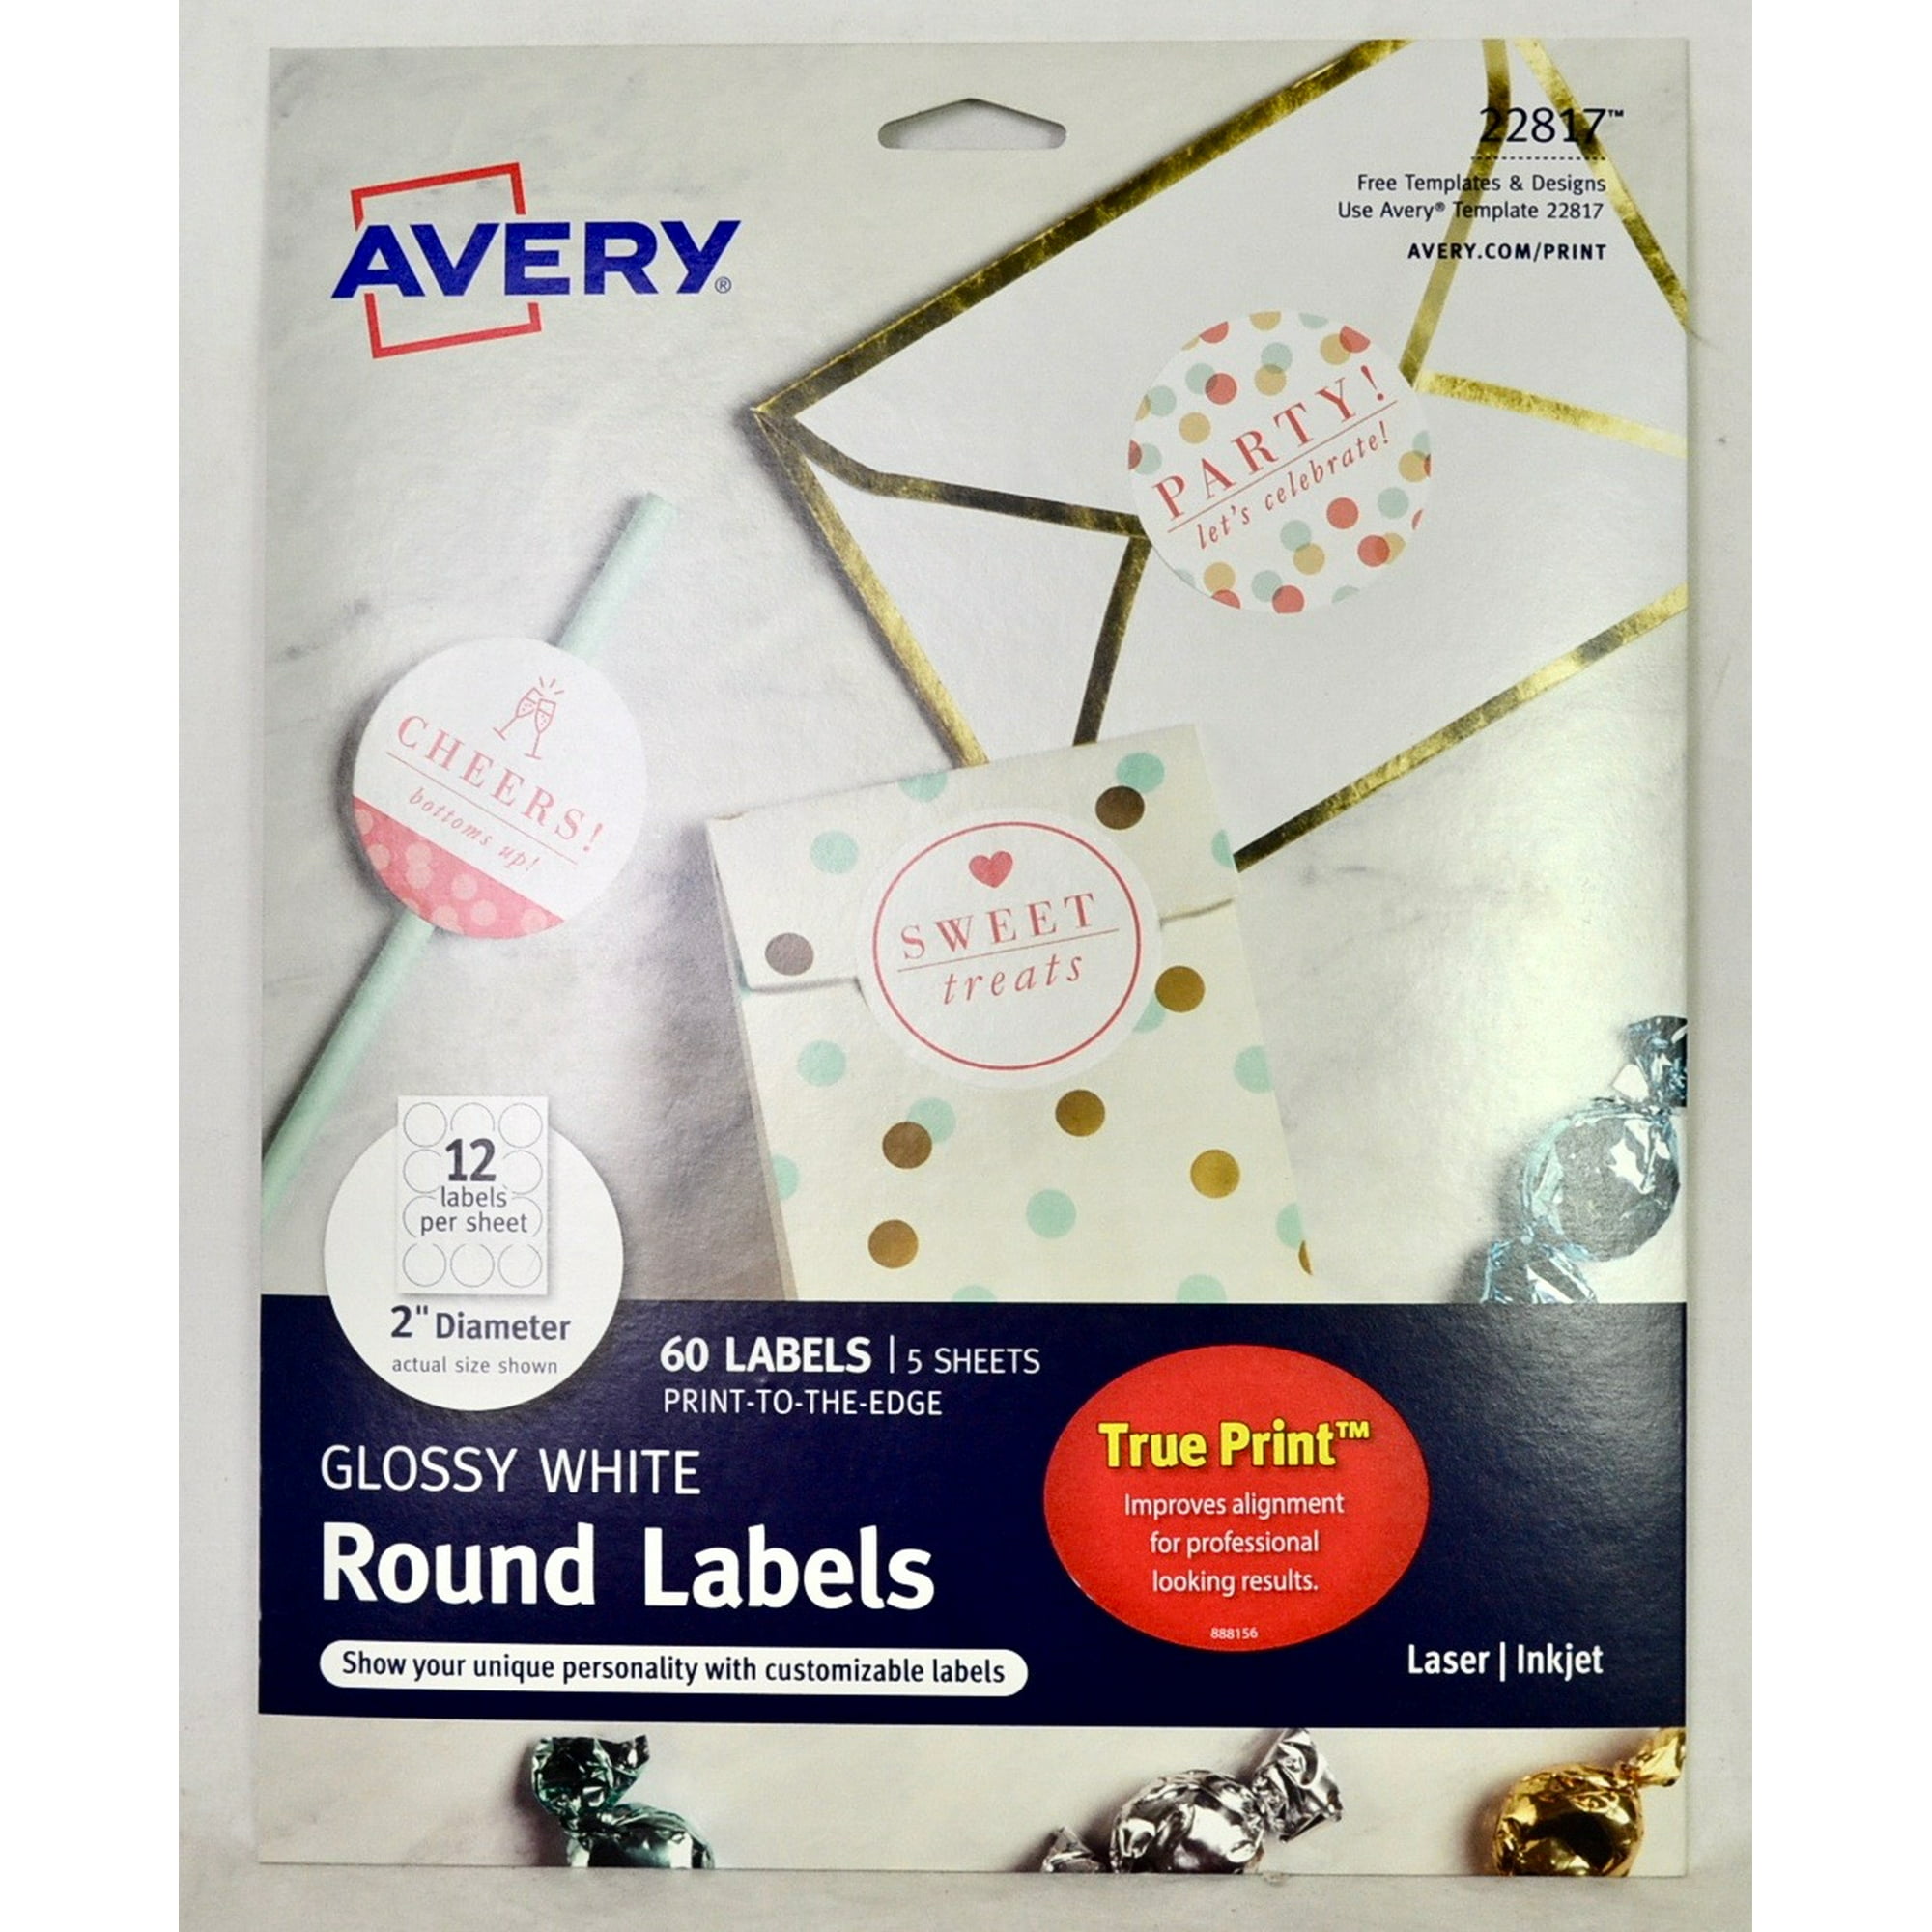 Avery Print To The Edge Round Labels